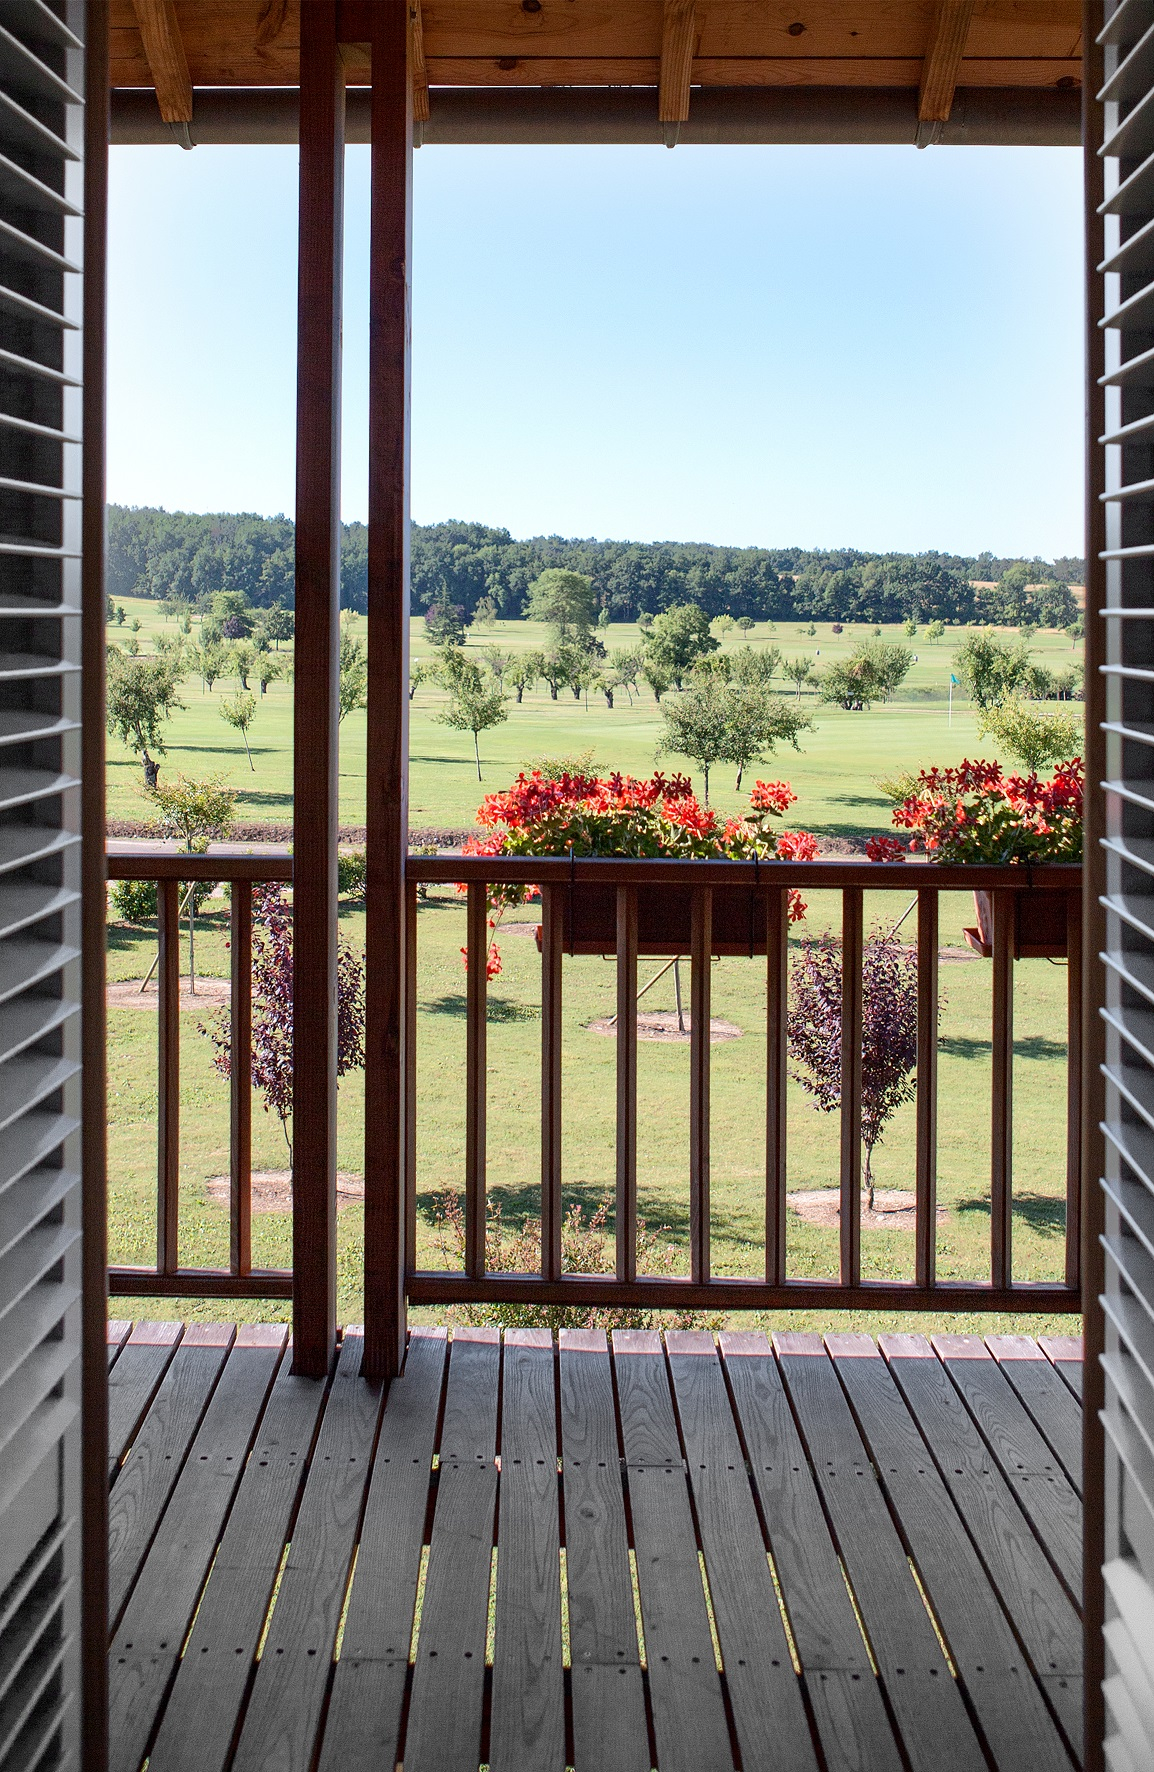 The view from the Relais at Chateau des Vigiers, Dordogne, France. Golf Planet Holidays.